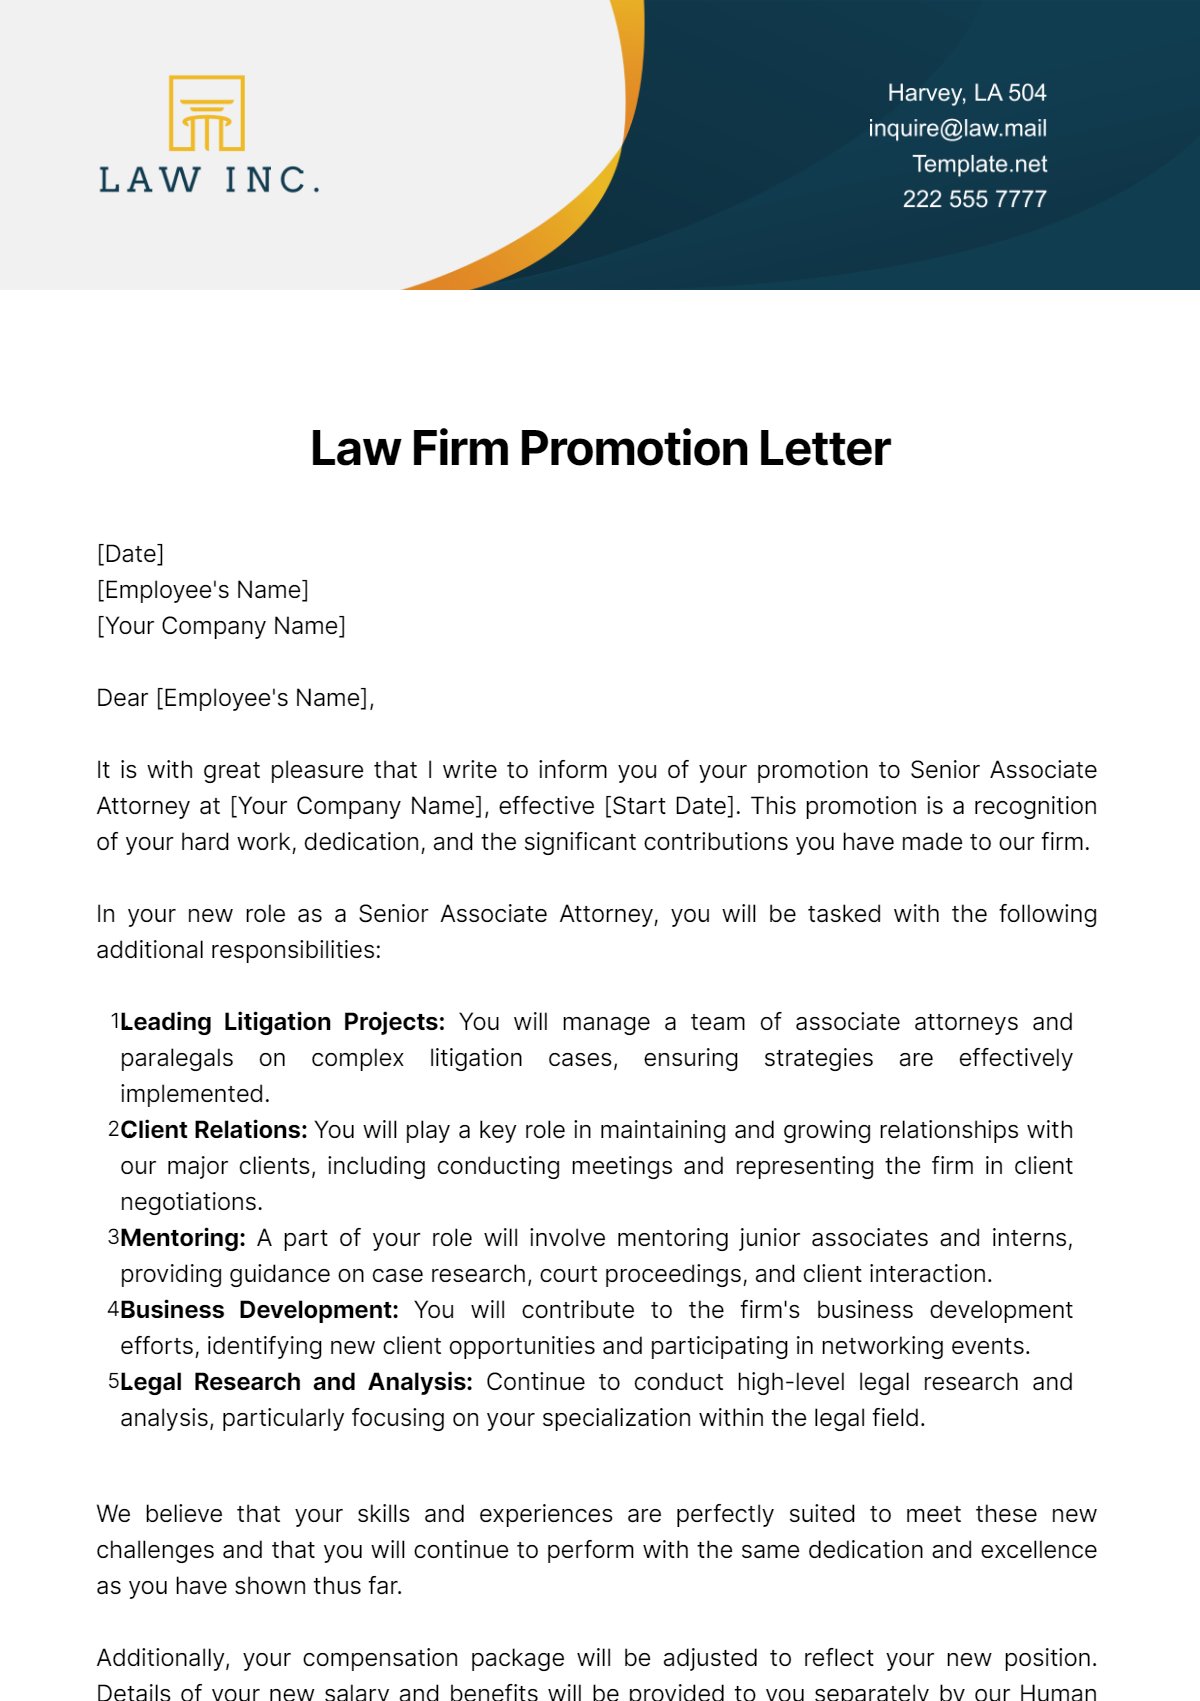 Law Firm Promotion Letter Template